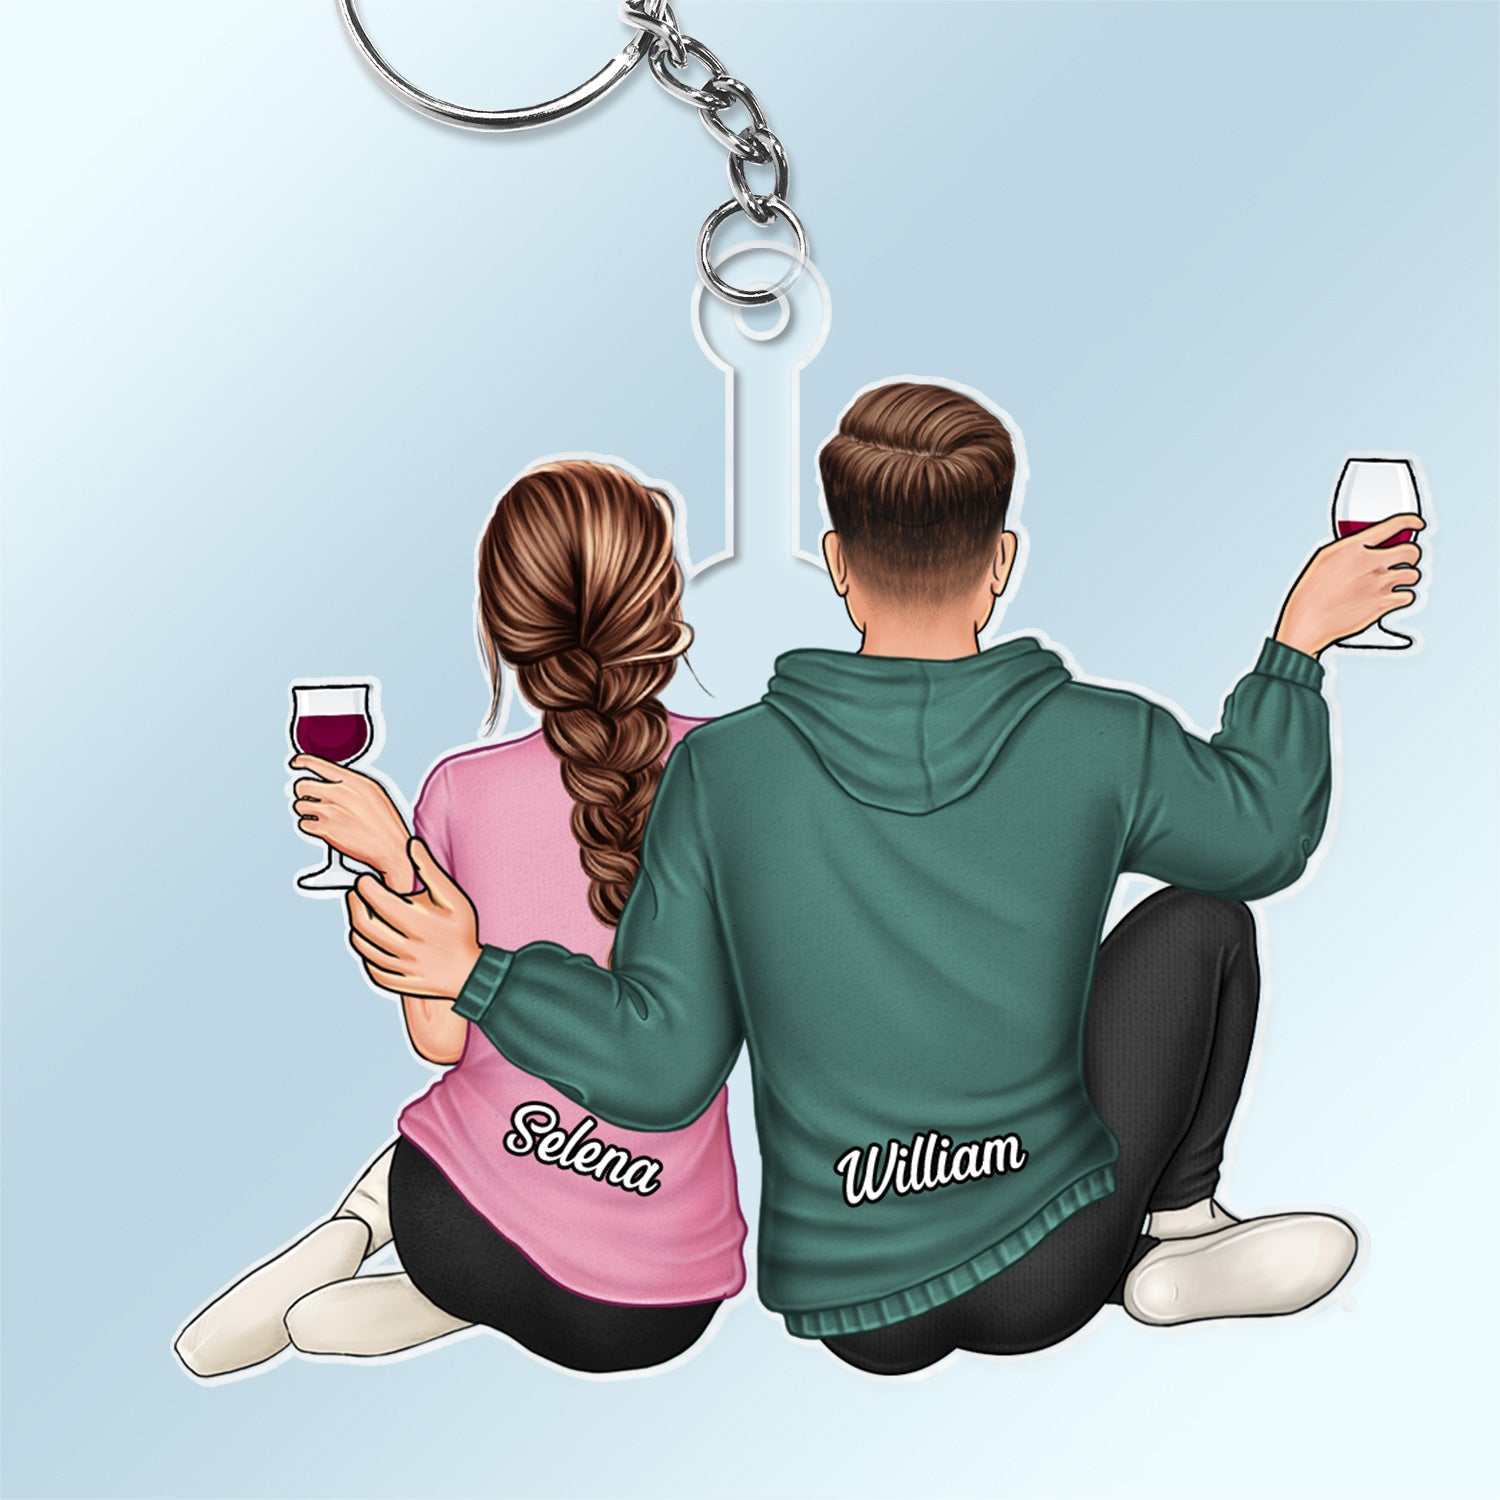 Couple Hugging - Anniversary Gift For Couples - Personalized Cutout Acrylic Keychain